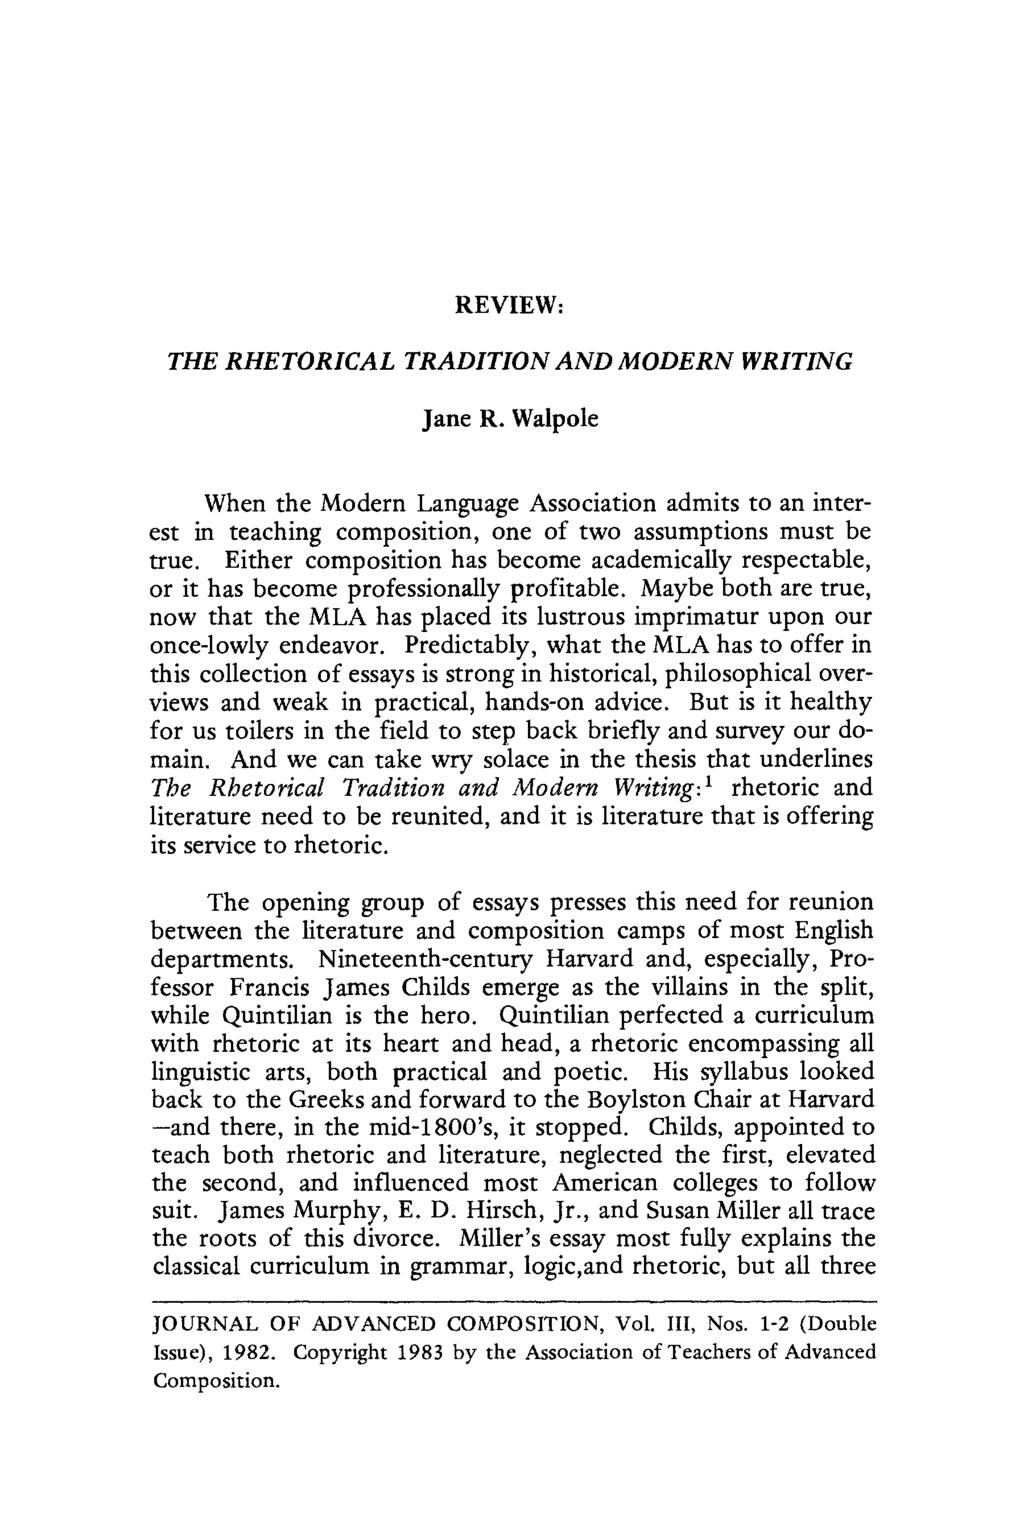 REVIEW: THE RHETORICAL TRADITION AND MODERN WRITING Jane R. Walpole When the Modern Language Association admits to an interest in teaching composition, one of two assumptions must be true.